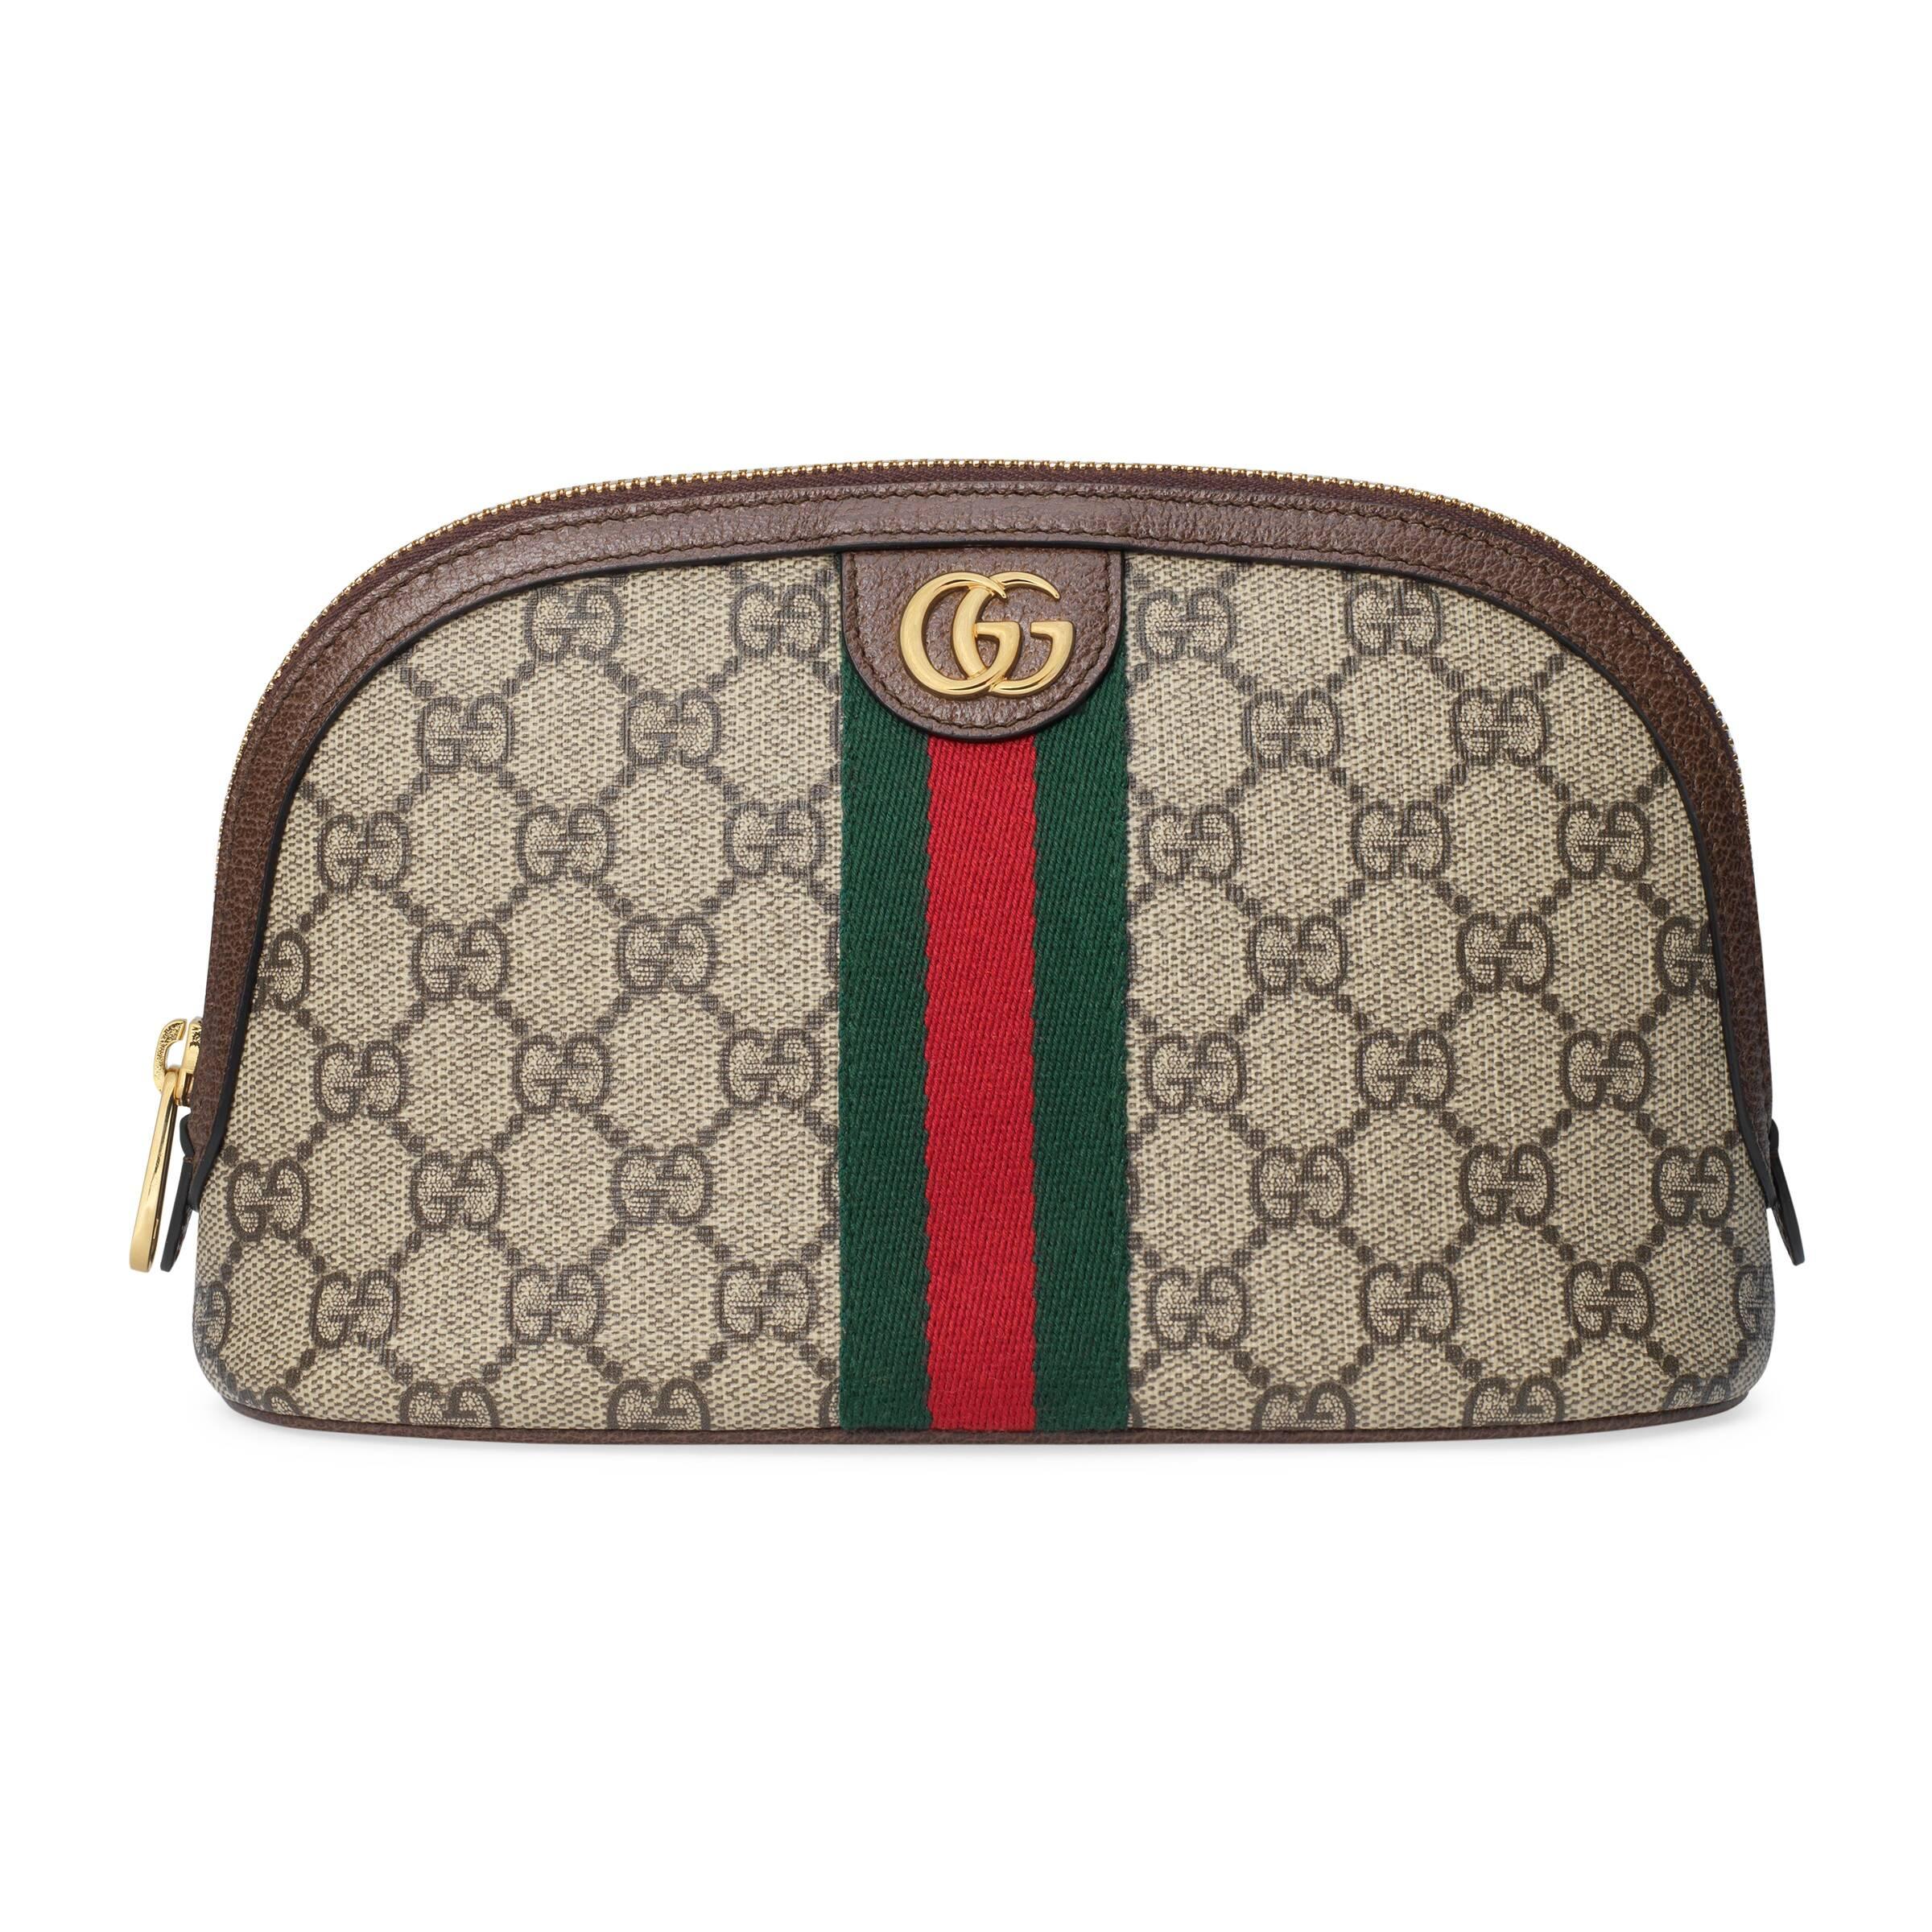 Gucci Canvas Ophidia Large Cosmetic Case in Beige (Natural) - Lyst